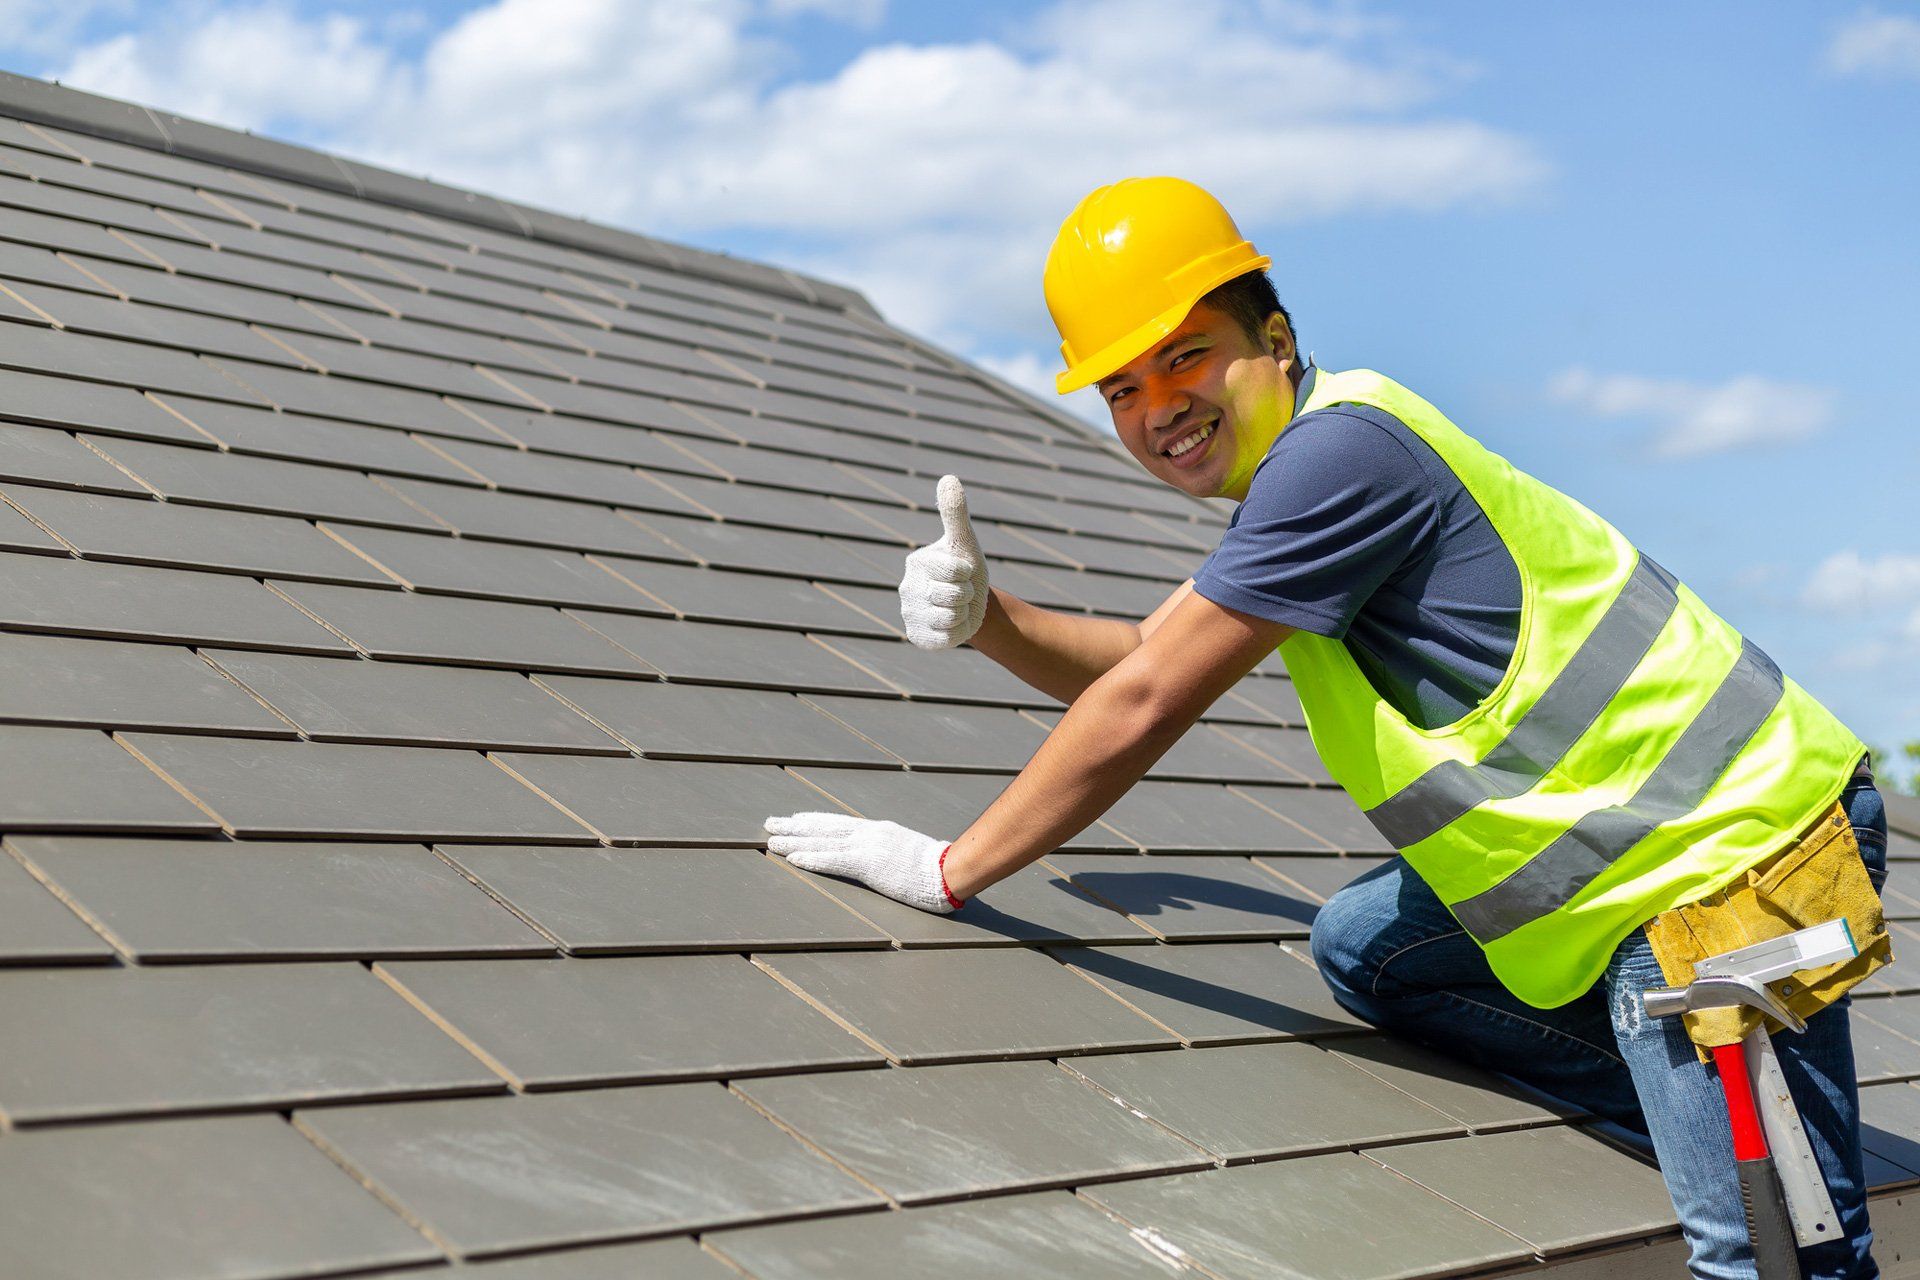 Tr Construction - Top 10 Best Roofers In San Diego